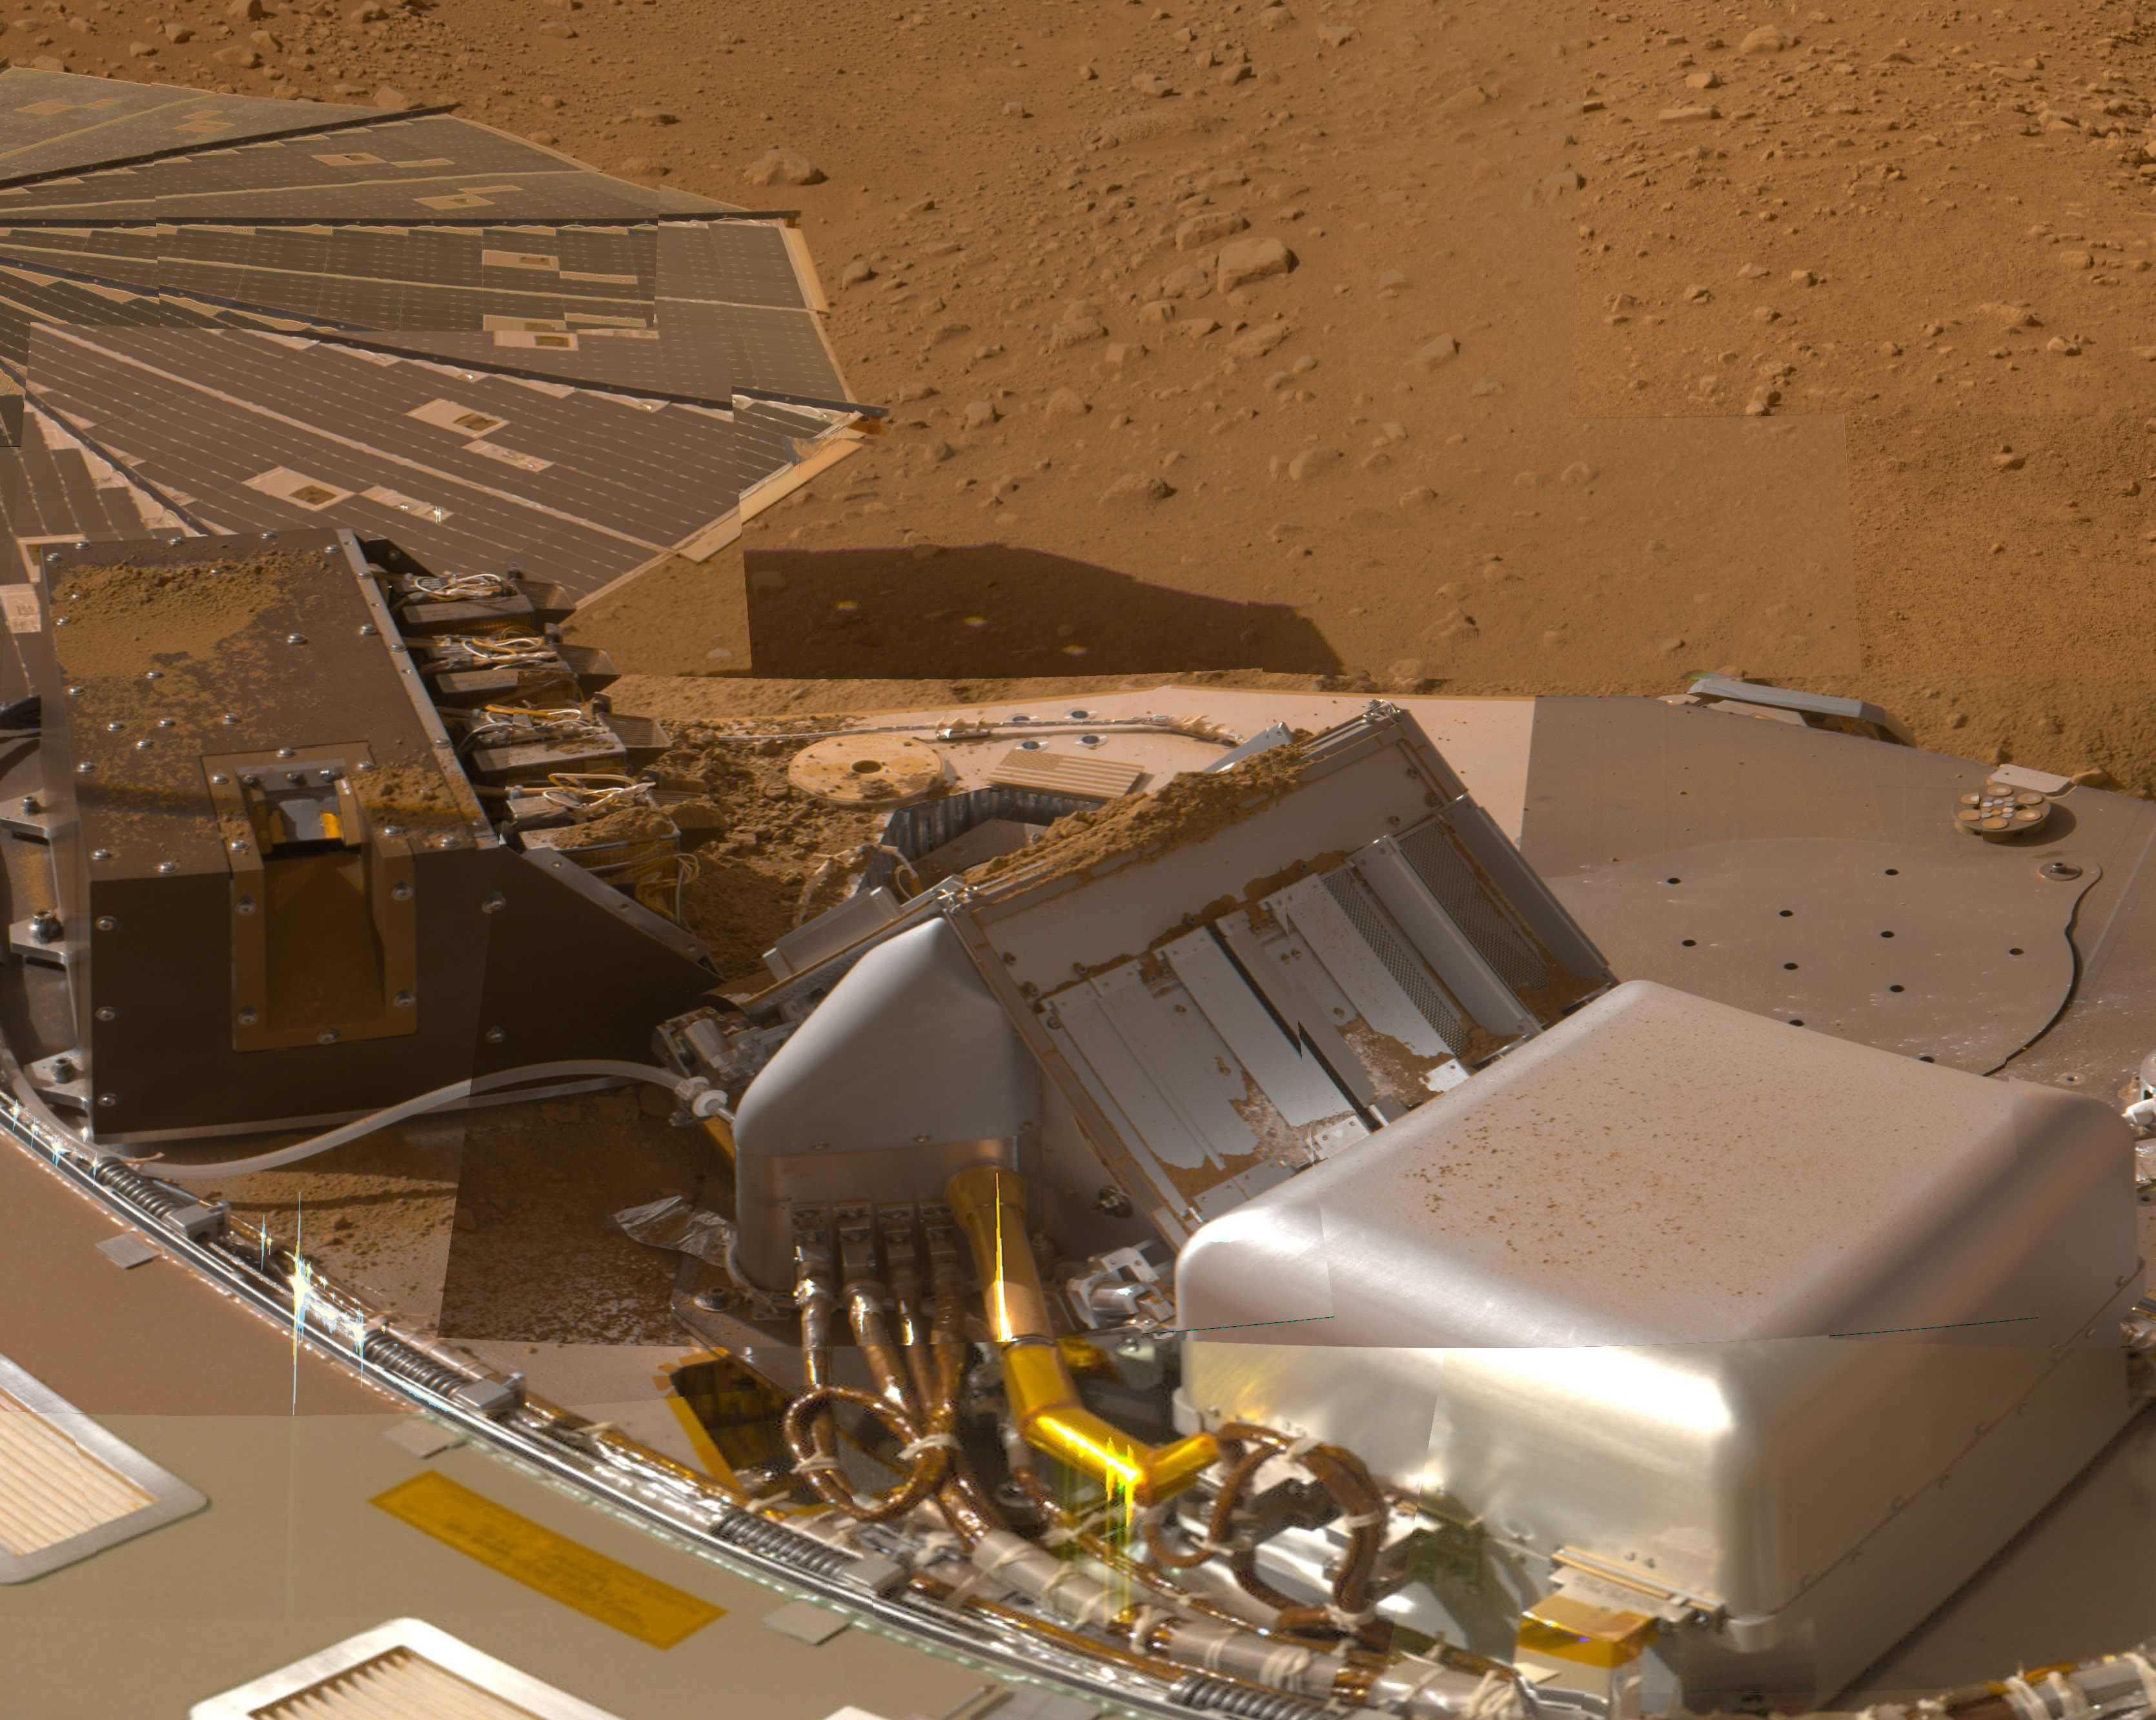 Dirt is scattered across the instrument deck of the lander.